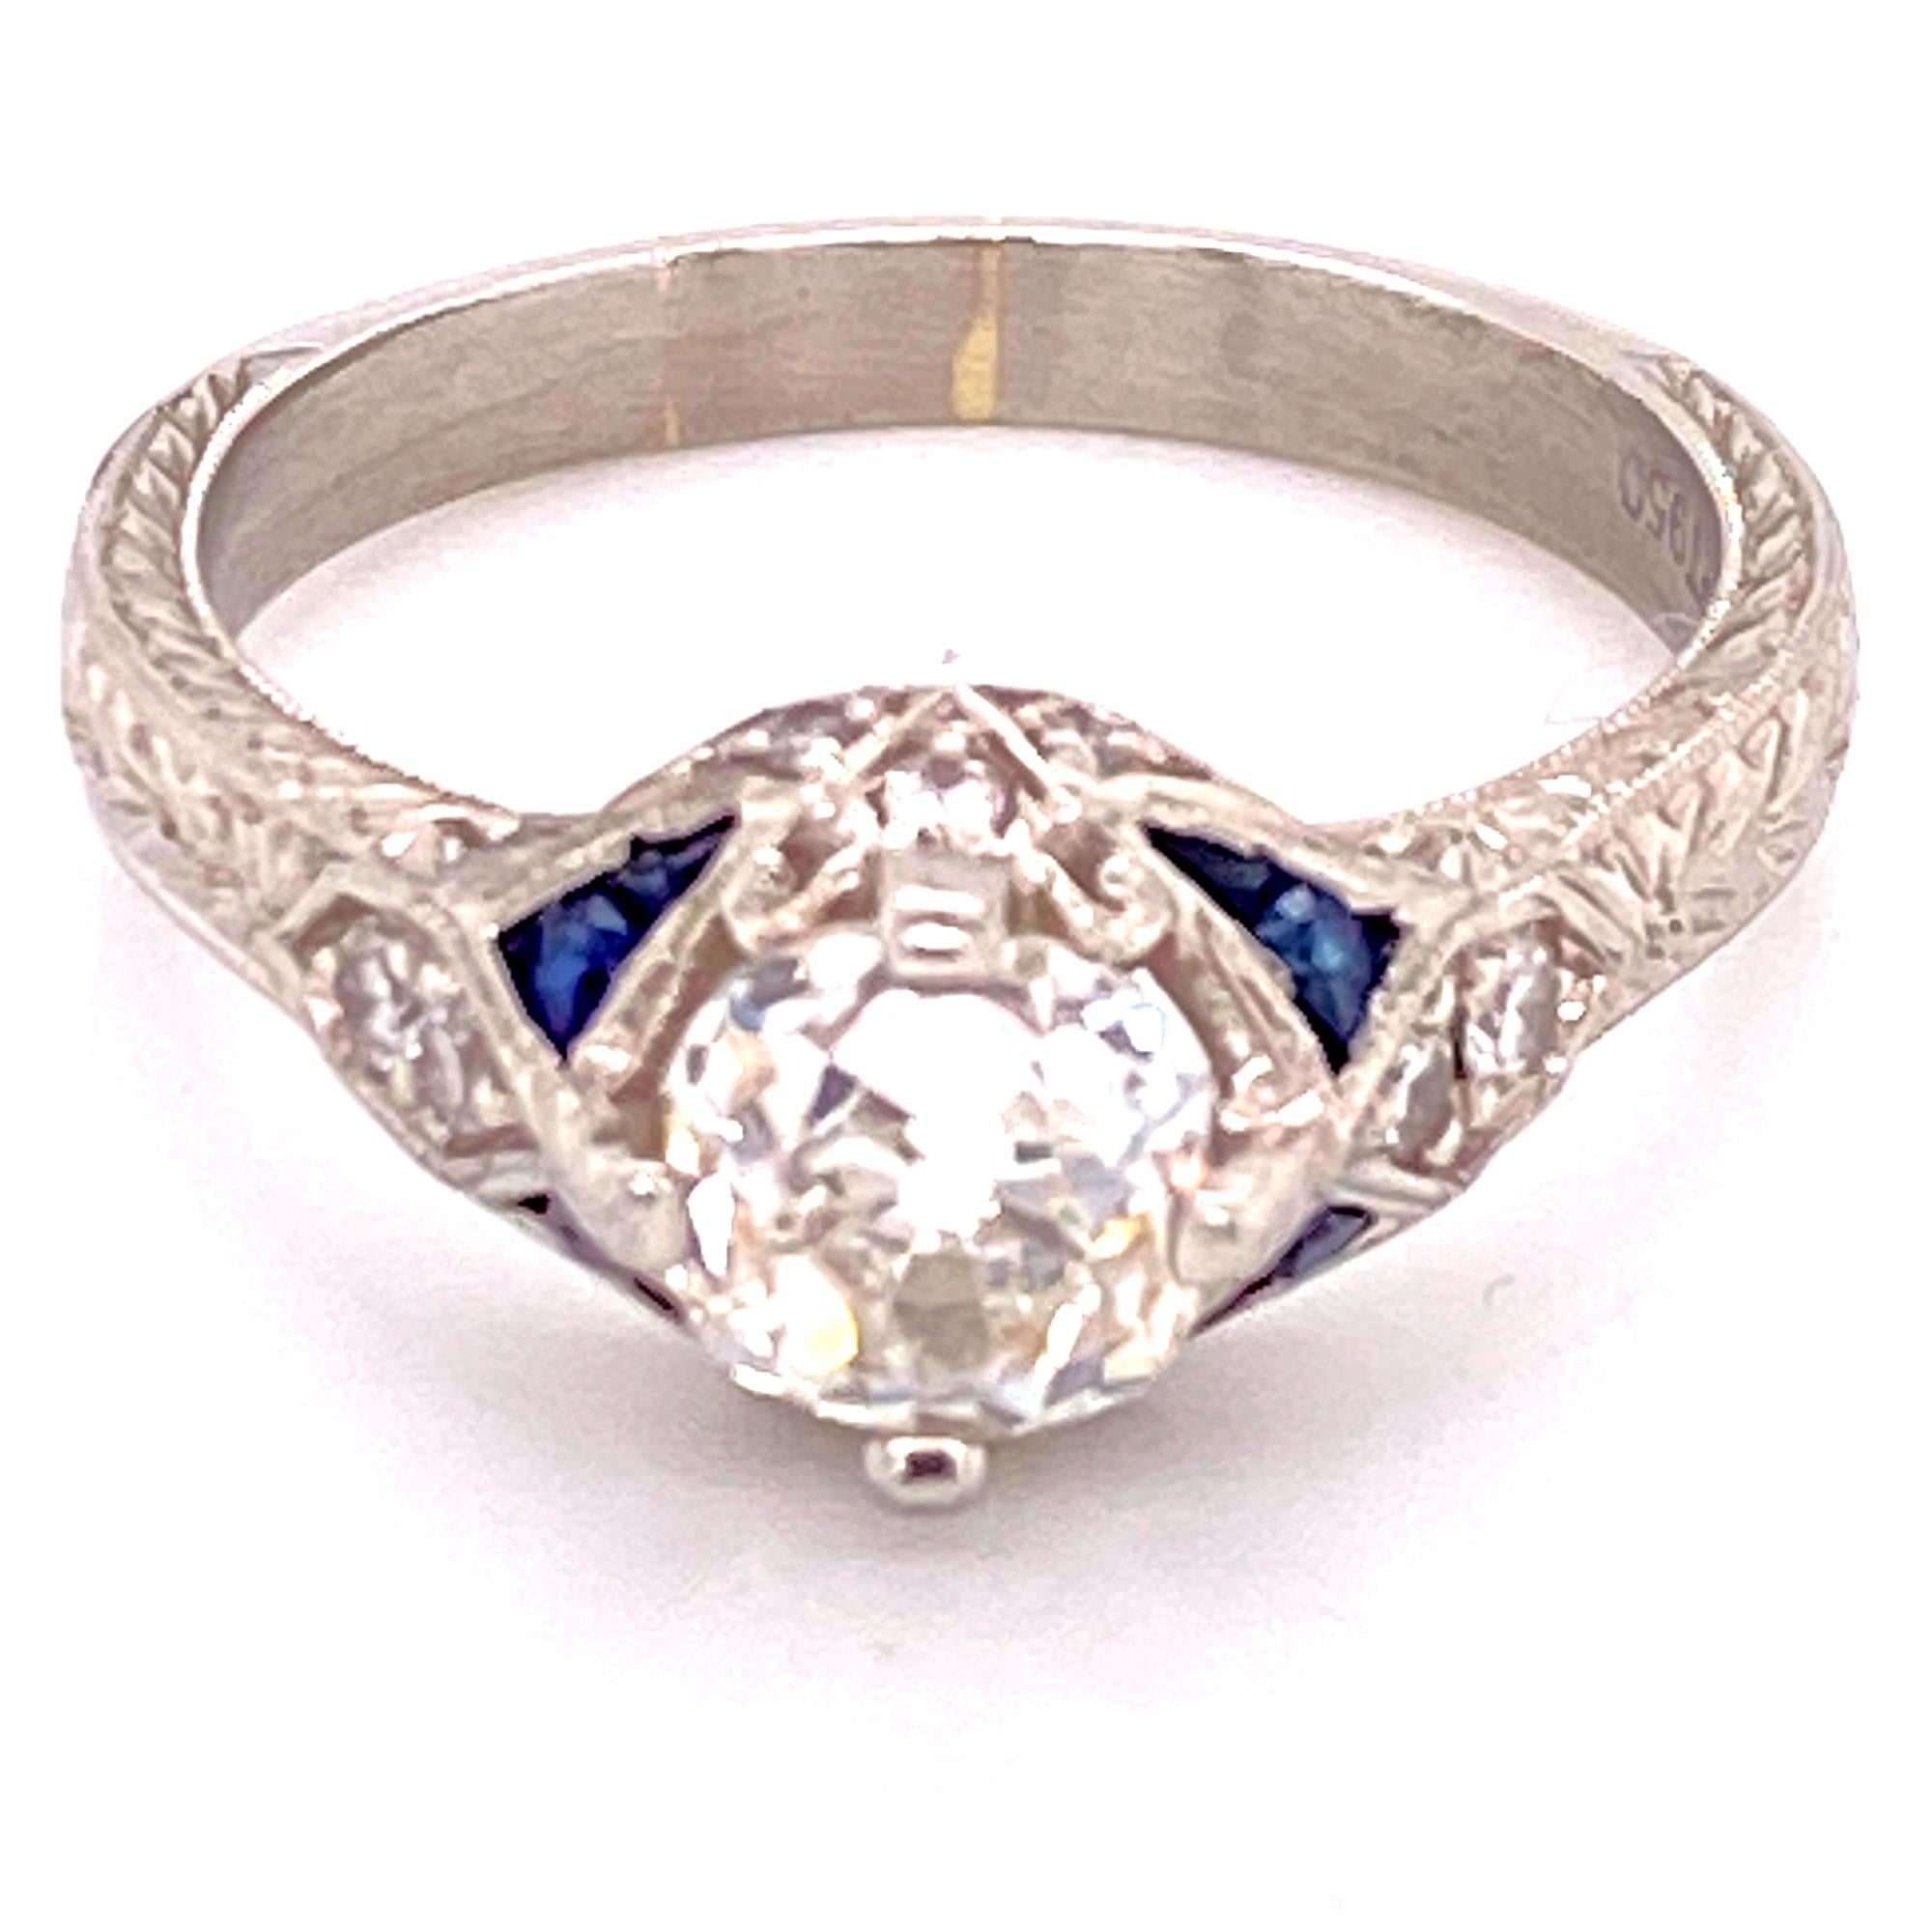 Fabulous Old Mine Cut diamond Deco style engagement ring fashioned in platinum. The ring features a center Old Mine cut diamond weighing 1.20 carats and another 10 Old European cut diamonds weighing .20 carat total weight. The mounting also features